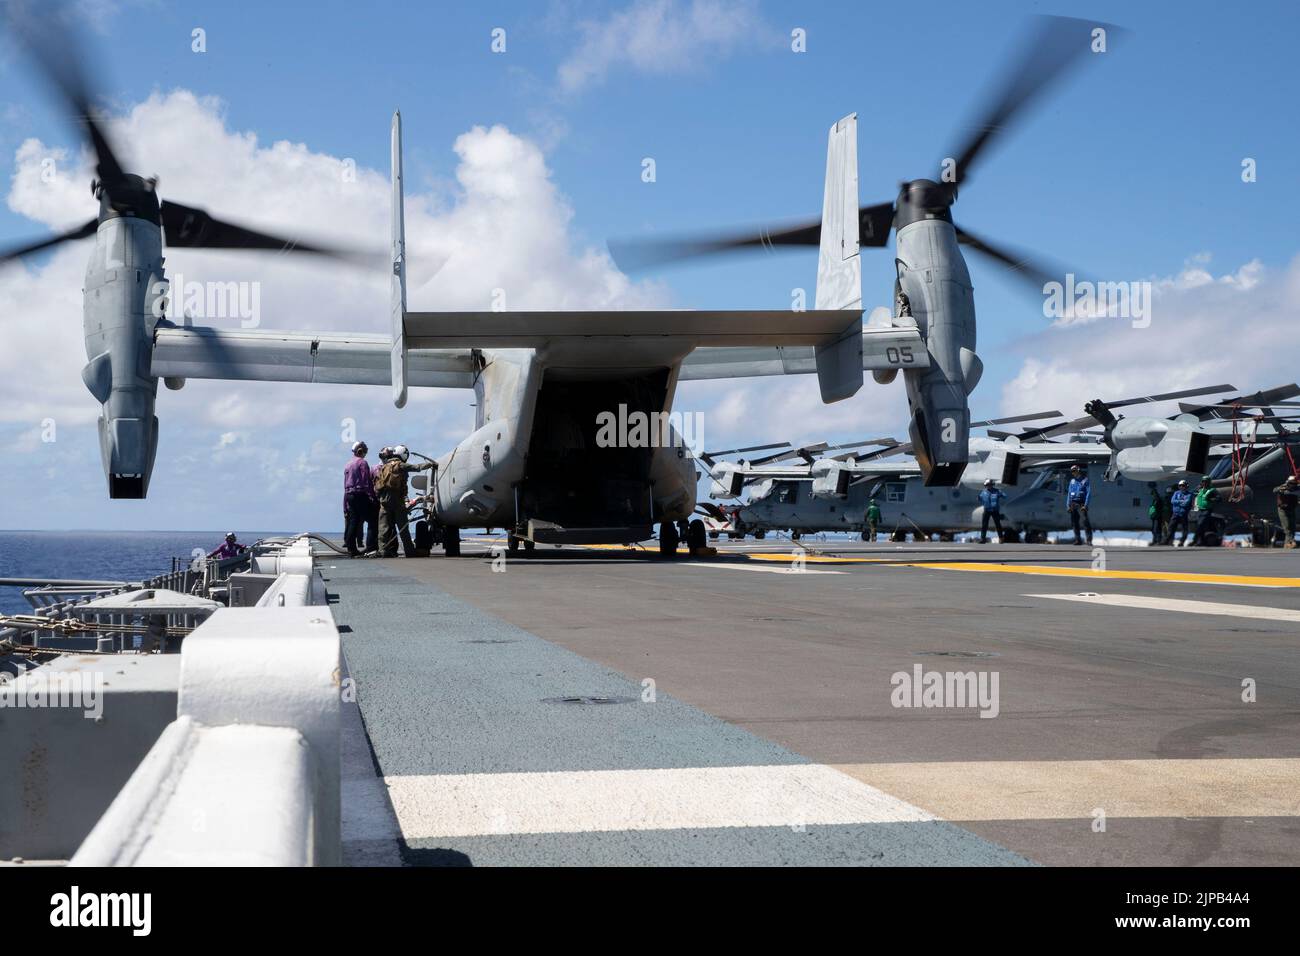 220816-N-XN177-1121 PHILIPPINE SEA (Aug. 16, 2022) – Sailors refuel an MV-22 Osprey tiltrotor aircraft assigned to Marine Medium Tiltrotor Squadron (VMM) 262 (Reinforced) aboard amphibious assault carrier USS Tripoli (LHA 7), Aug. 16, 2022. Tripoli is operating in the U.S. 7th Fleet area of operations to enhance interoperability with allies and partners and serve as a ready response force to defend peace and maintain stability in the Indo-Pacific region. (U.S. Navy photo by Mass Communication Specialist 1st Class Peter Burghart) Stock Photo